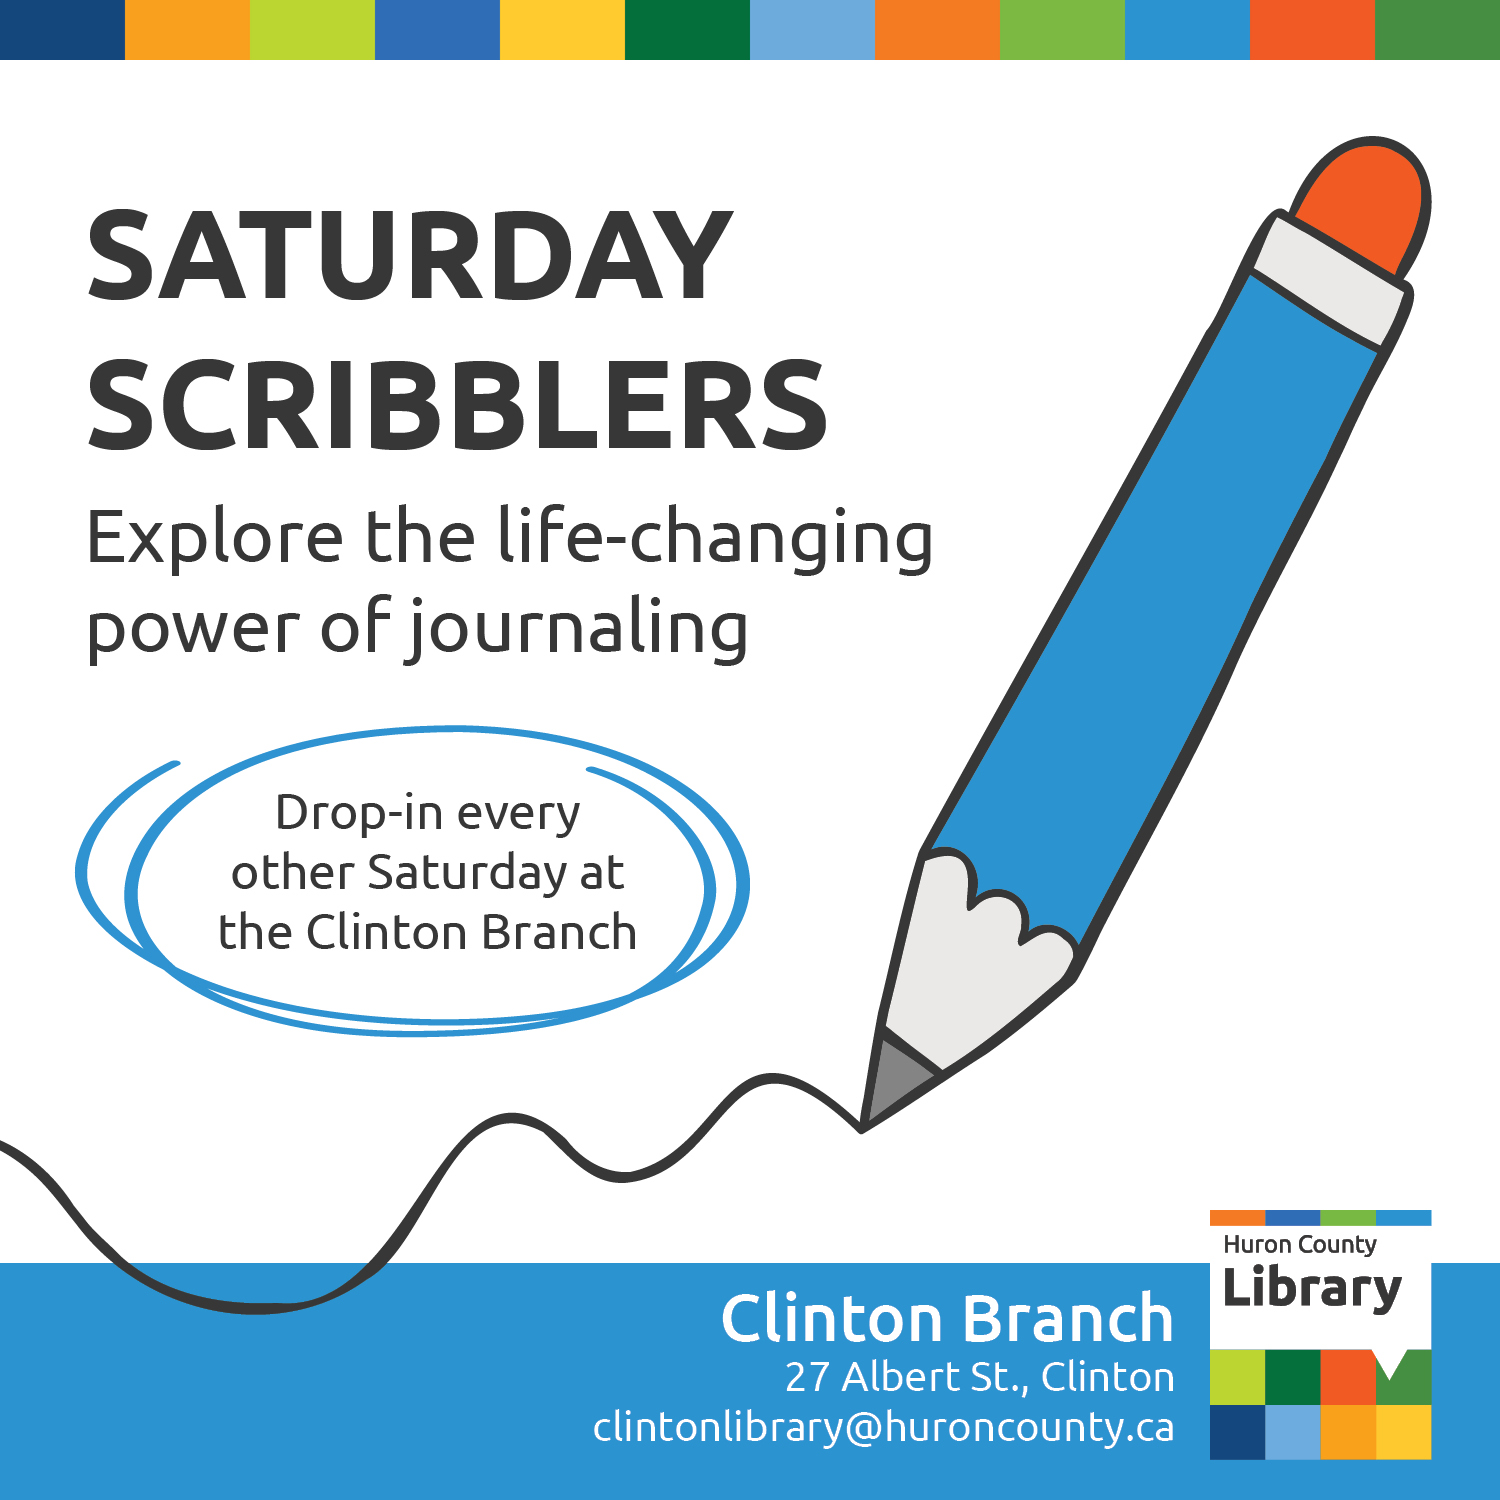 Illustration of a pencil drawing a line with text promoting Saturday Scribblers at Clinton Branch.